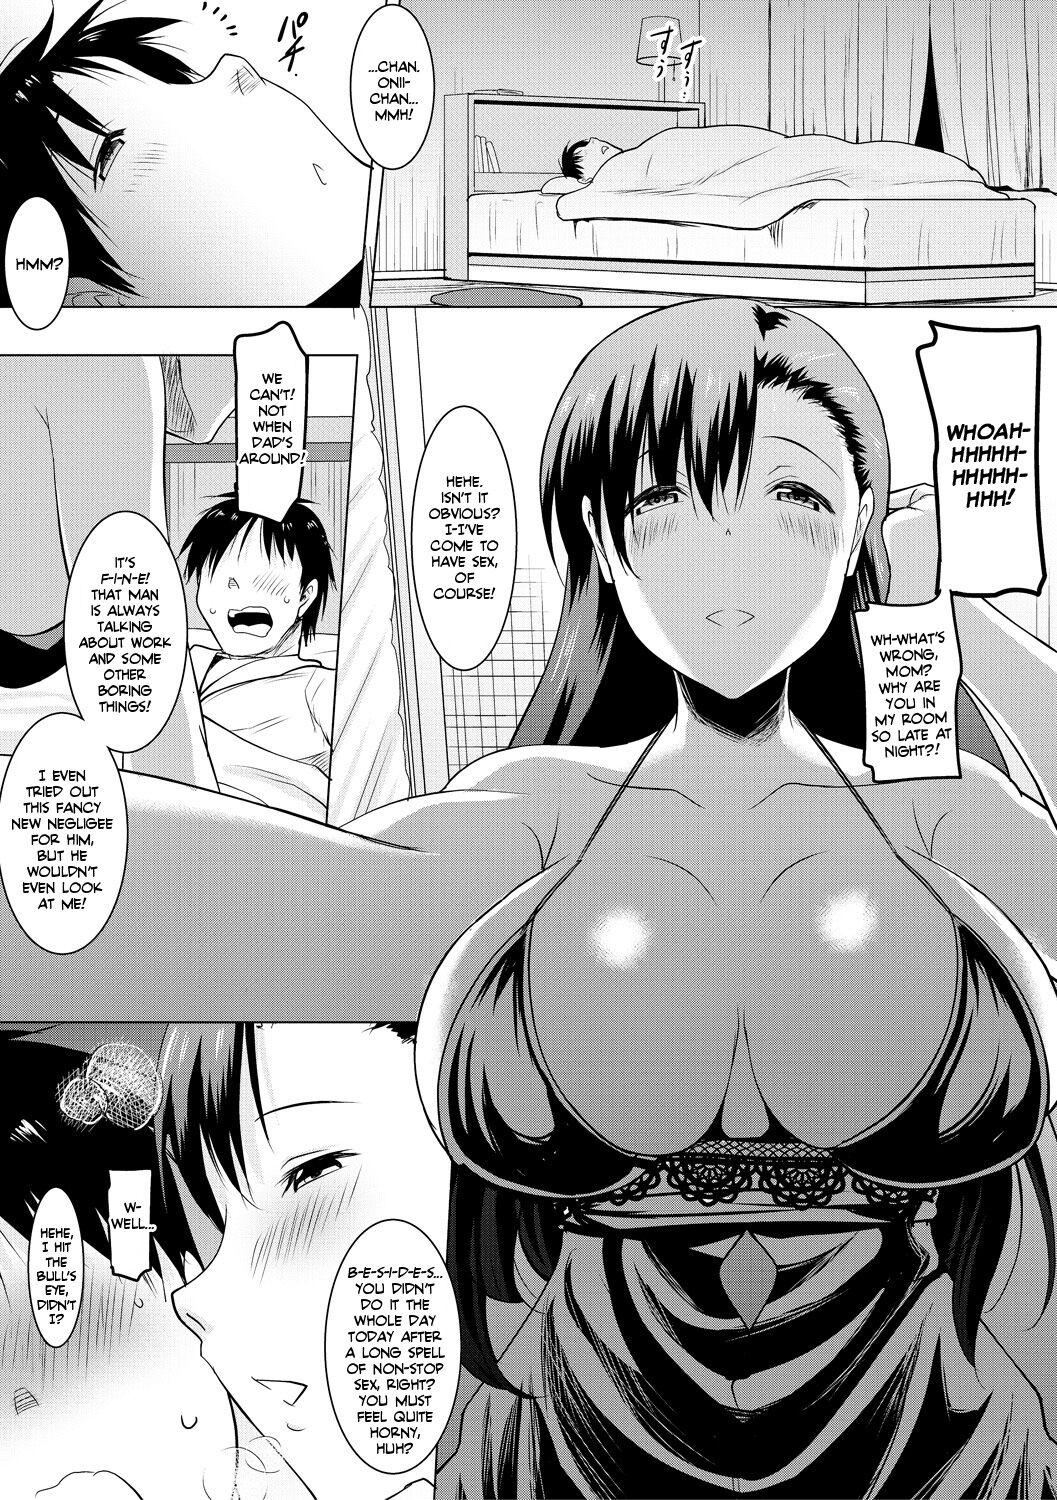 [Pony-R] I Can't Live Without My Little Sister's Tongue Chapter 01-02 + Secret Baby-making Sex with a Big-titted Mother and Daughter! (Kyonyuu Oyako no Shita to Shikyuu ni Renzoku Shasei) [English] [Team Rabu2] [Digital] 75